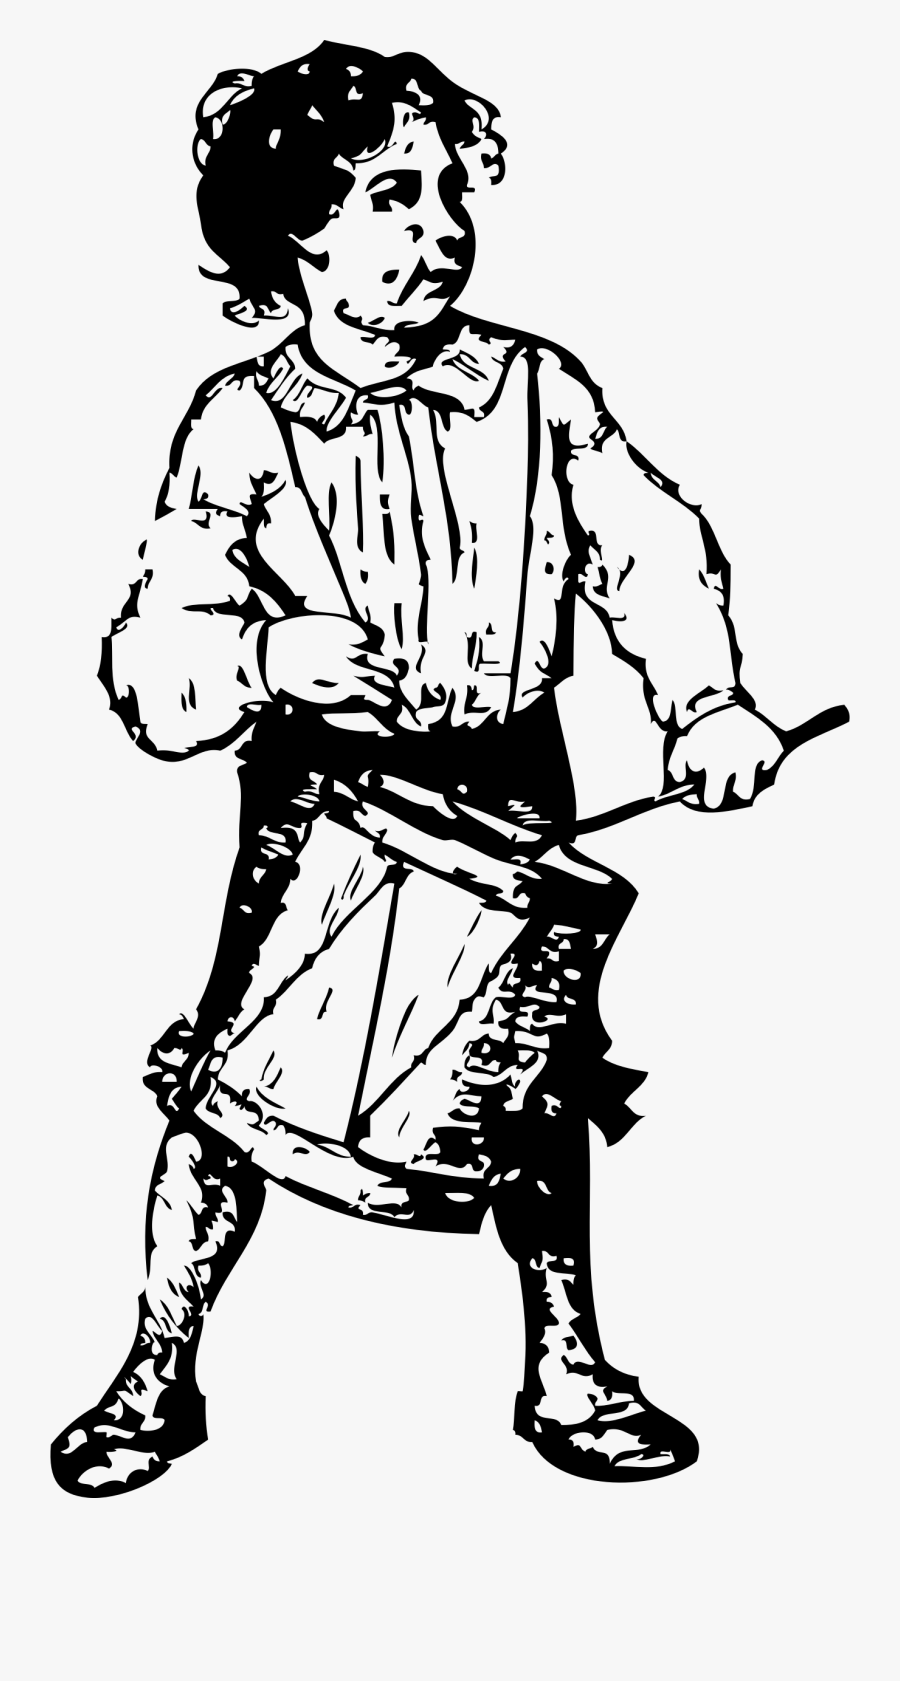 This Free Icons Png Design Of Drummer Boy - Drummer Boy Clip Art, Transparent Clipart